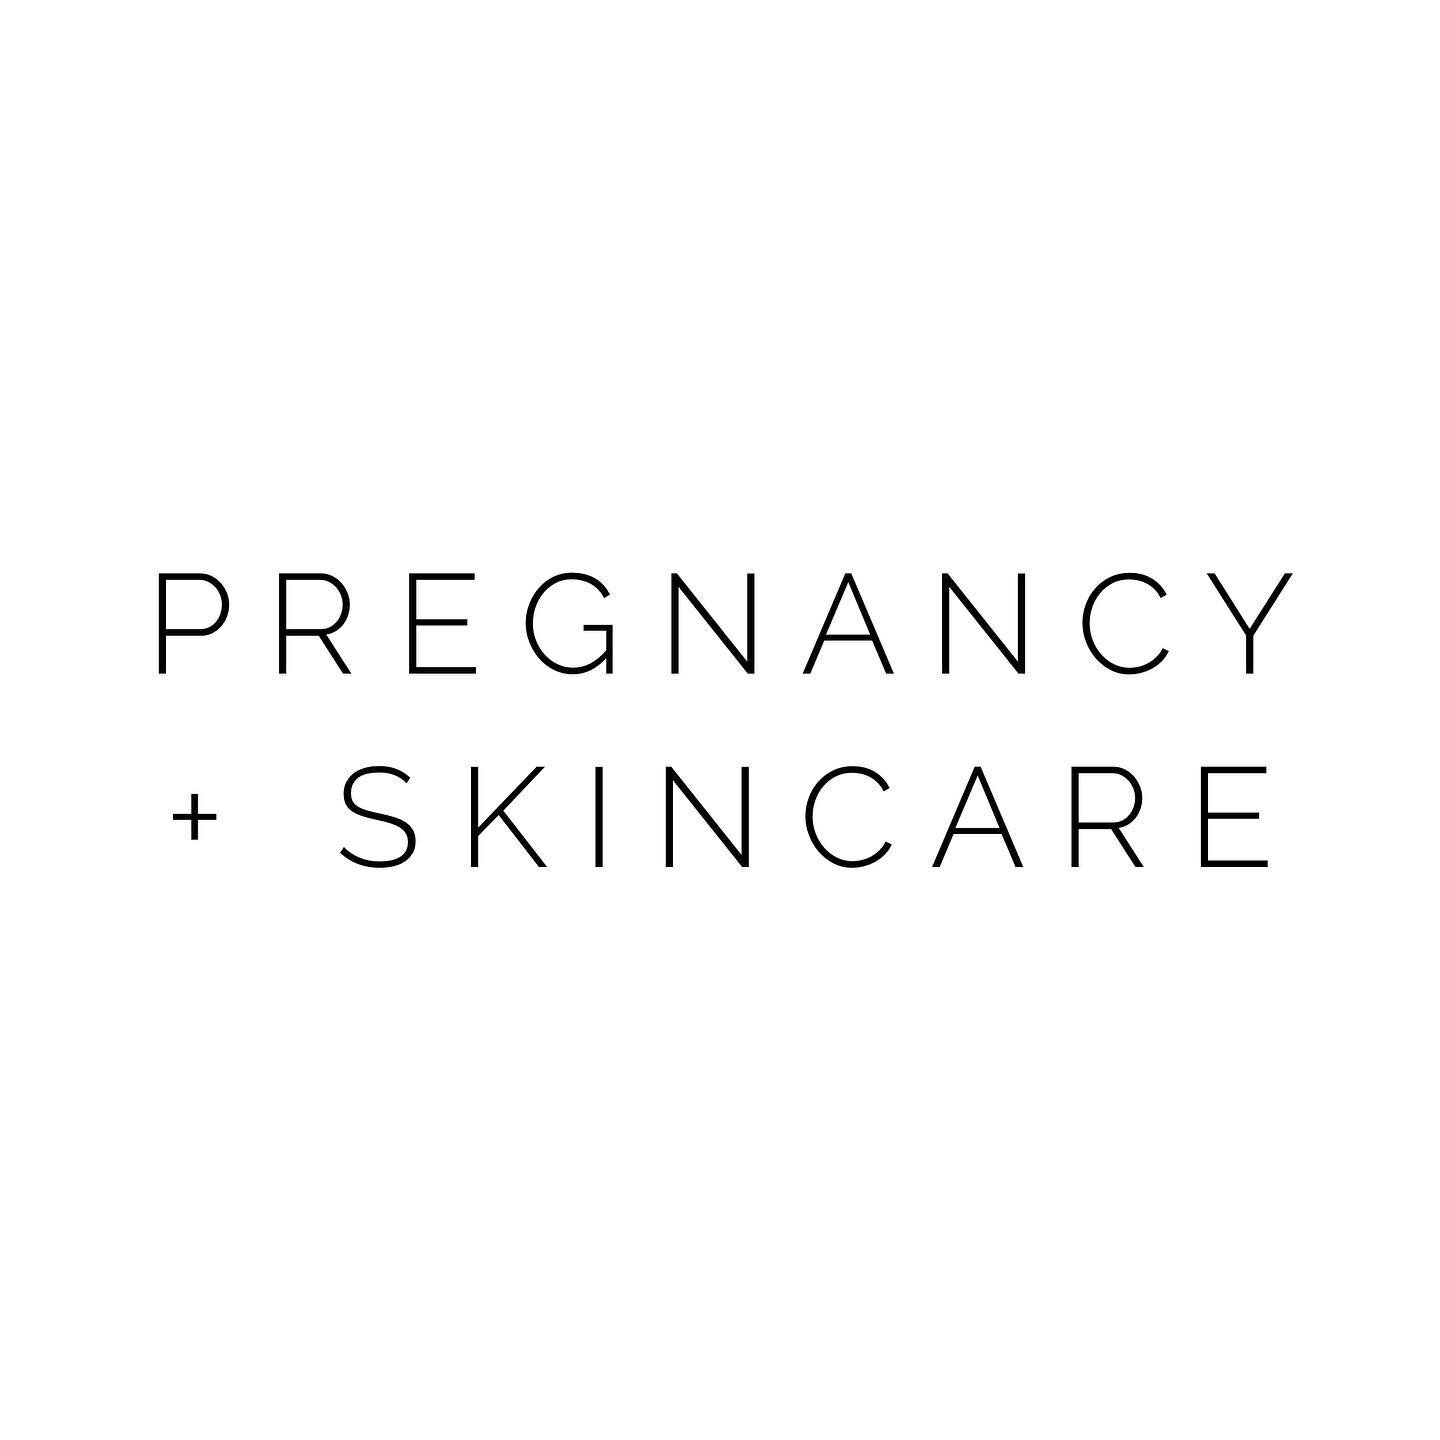 When you&rsquo;re pregnant you pretty much feel like you have to stop everything. But thankfully there are some really incredible powerful ingredients you can still use to treat breakouts and discoloration during pregnancy. ⁣
⁣
⁣
𝗕𝗲𝗻𝘇𝗼𝘆𝗹 𝗣𝗲?